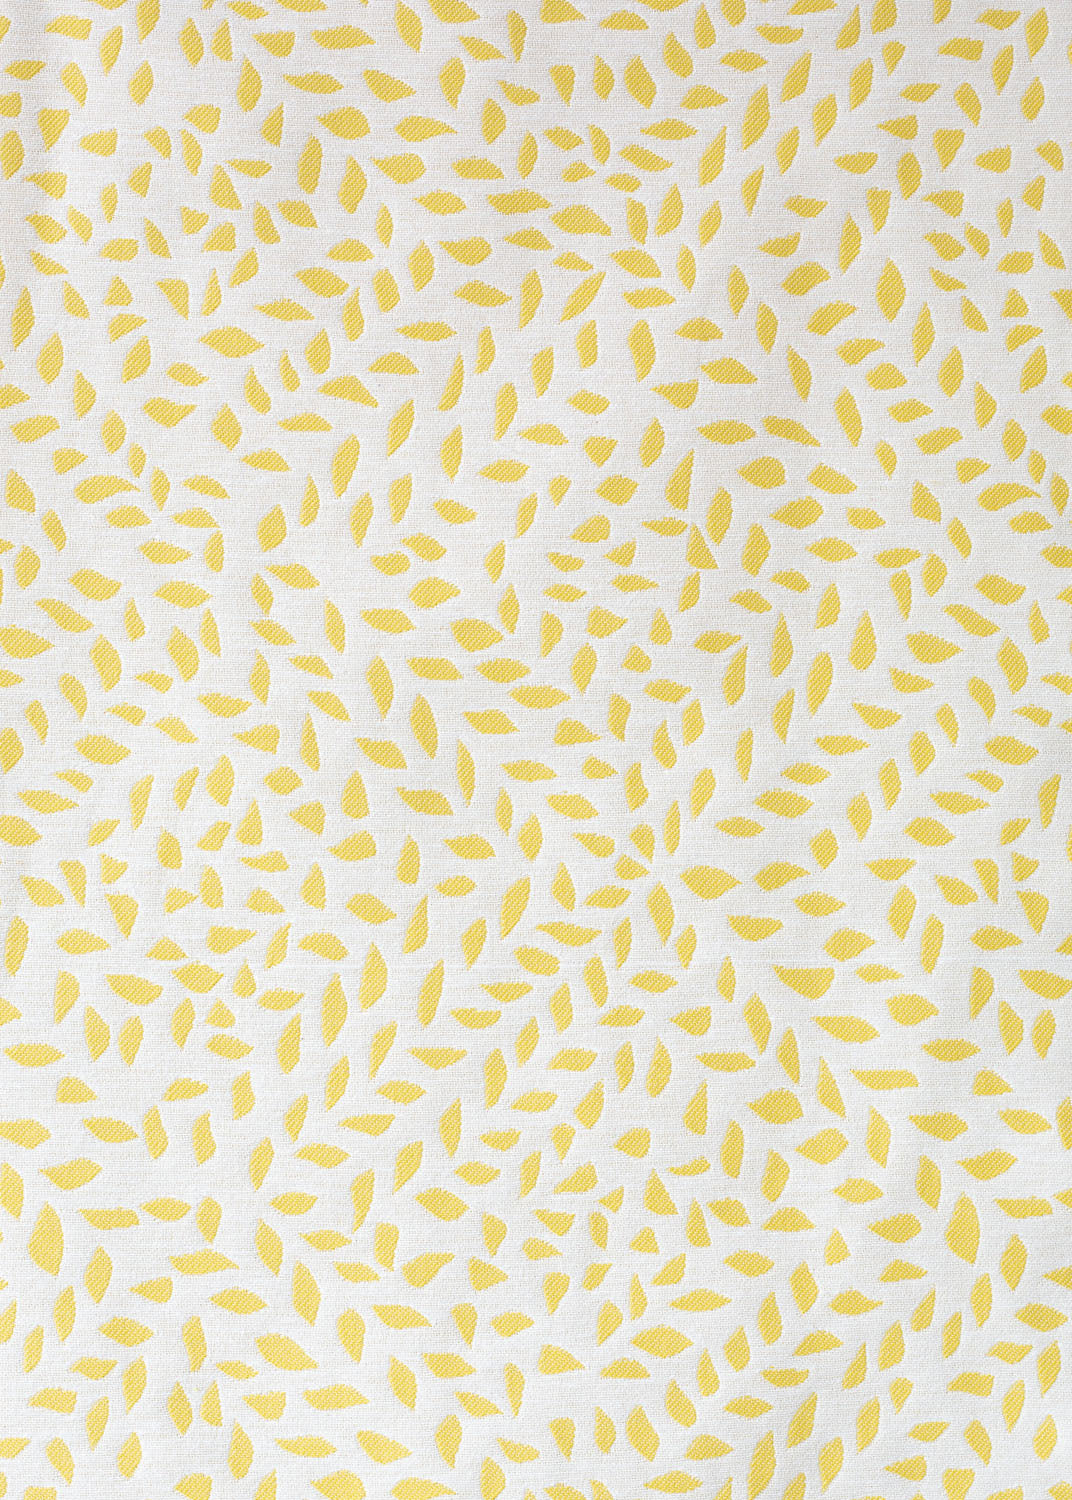 Detail of fabric in a botanical trellis print in yellow on a white field.